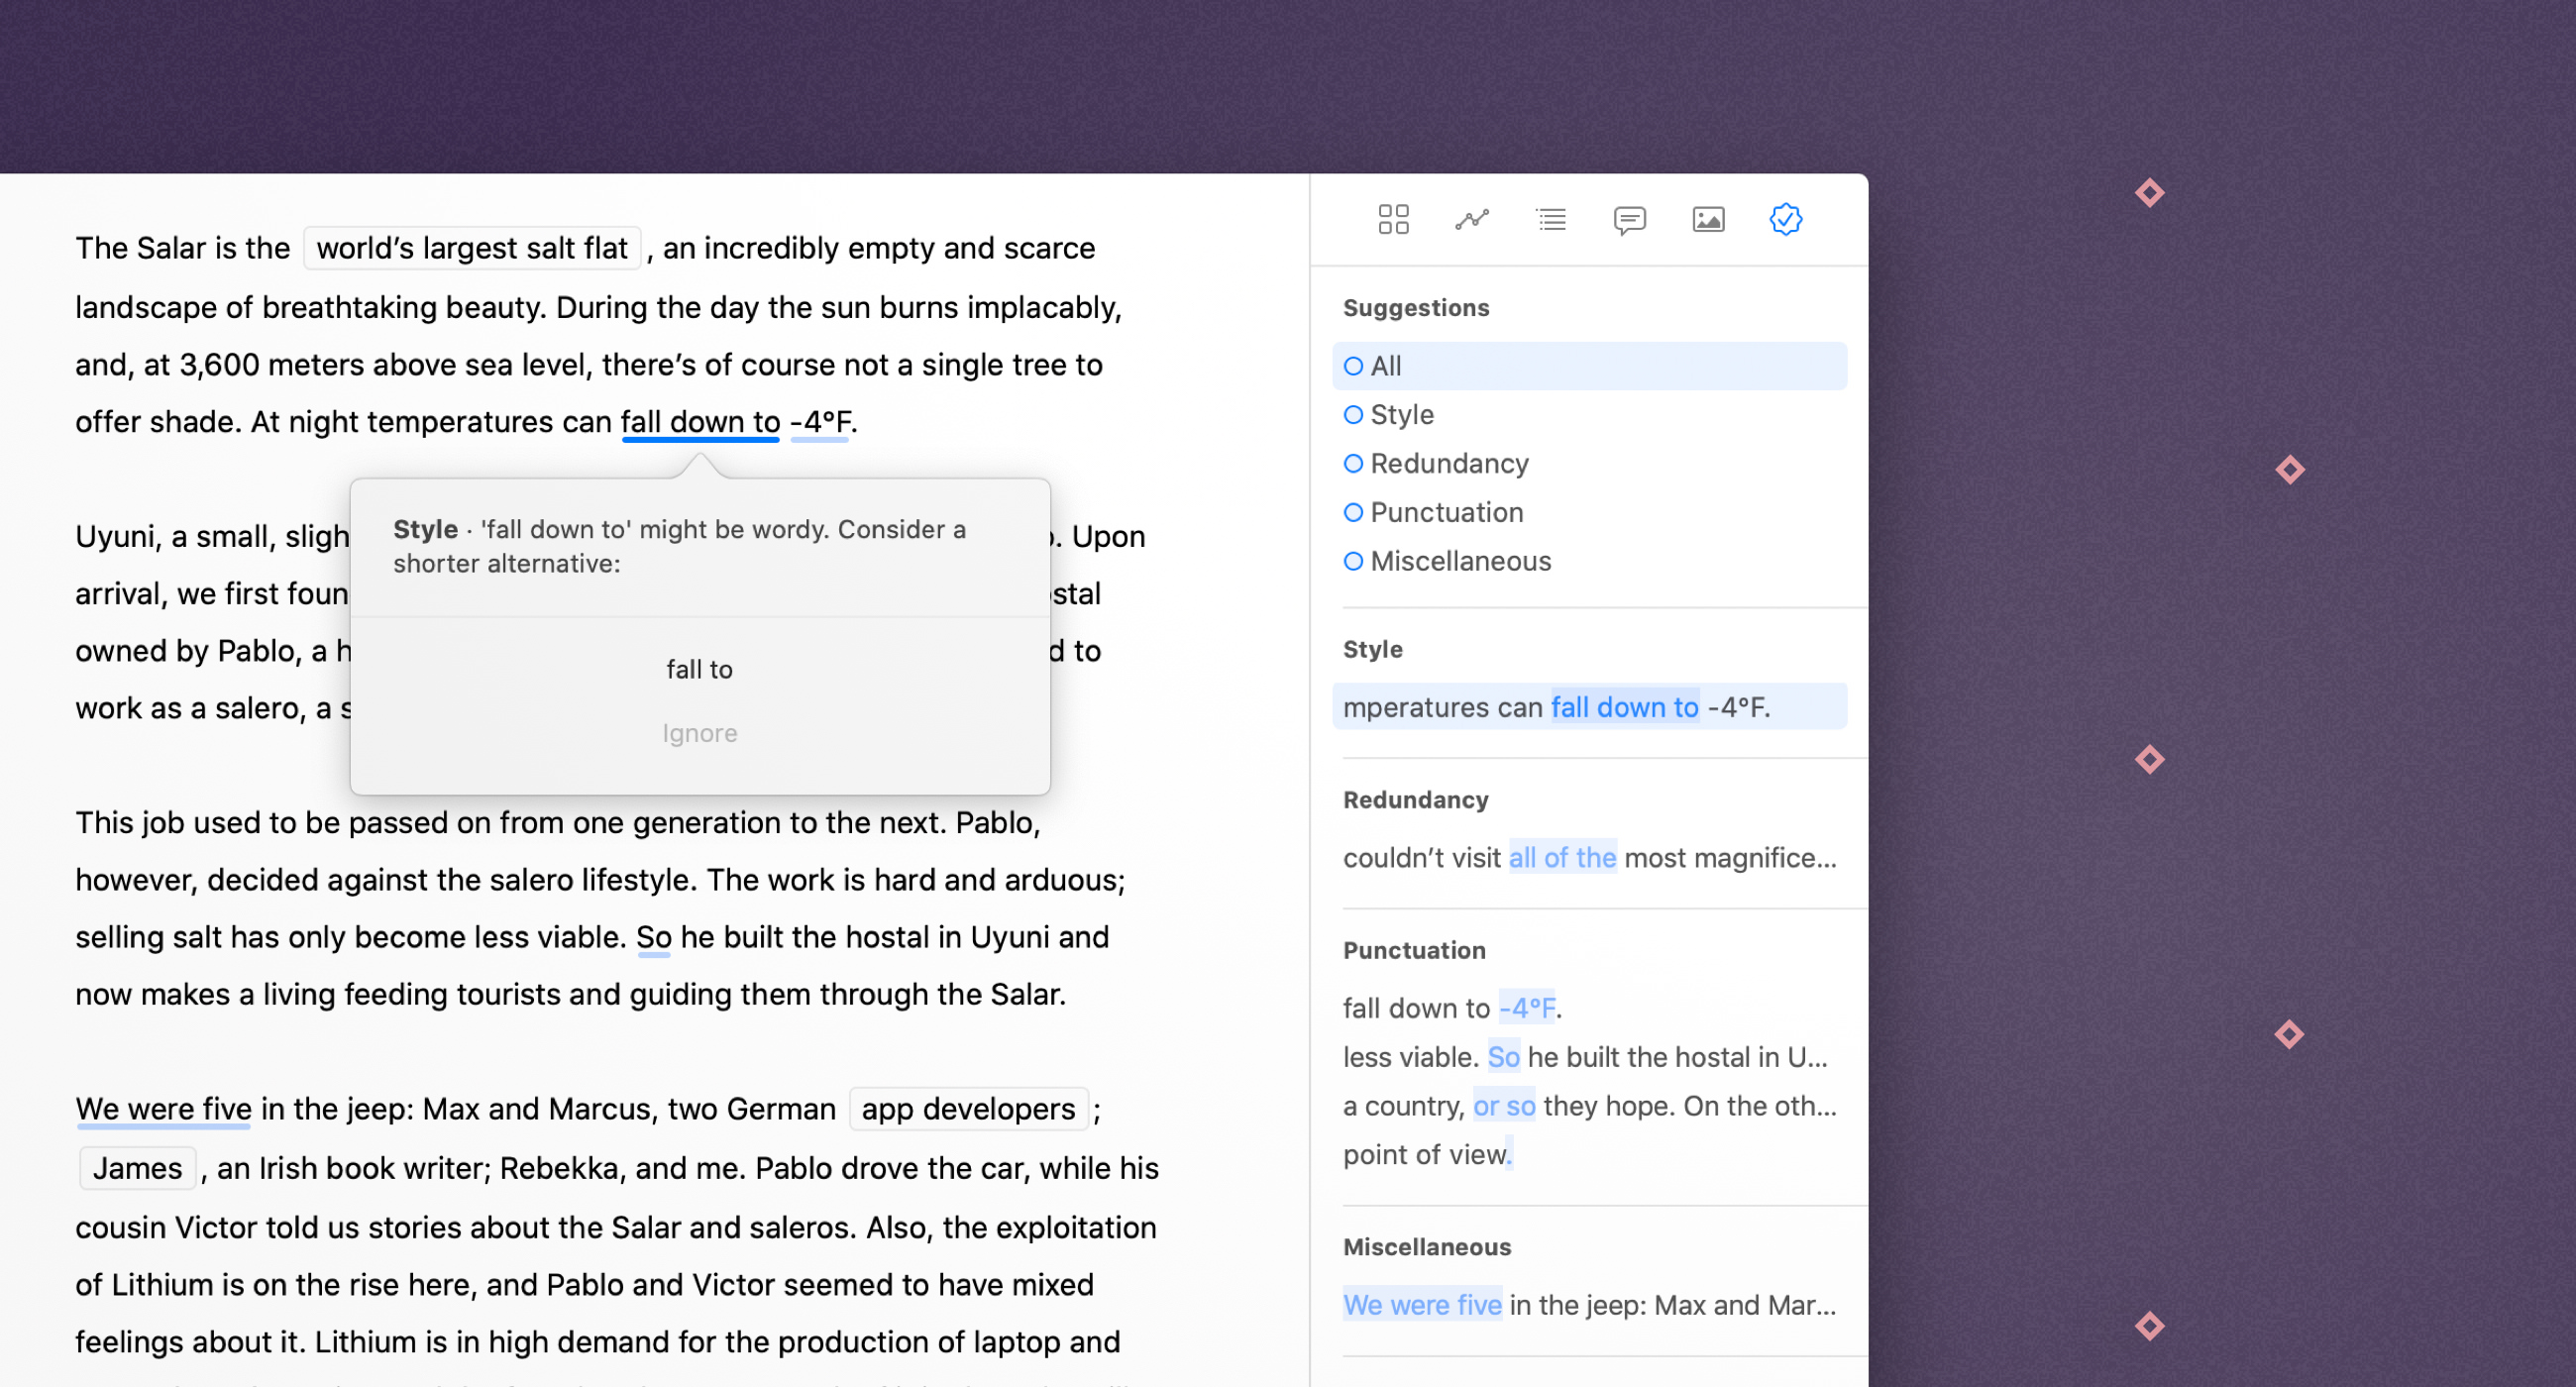 photo of Ulysses 20 writing app brings new dashboard with grammar and style check, outline features, more image